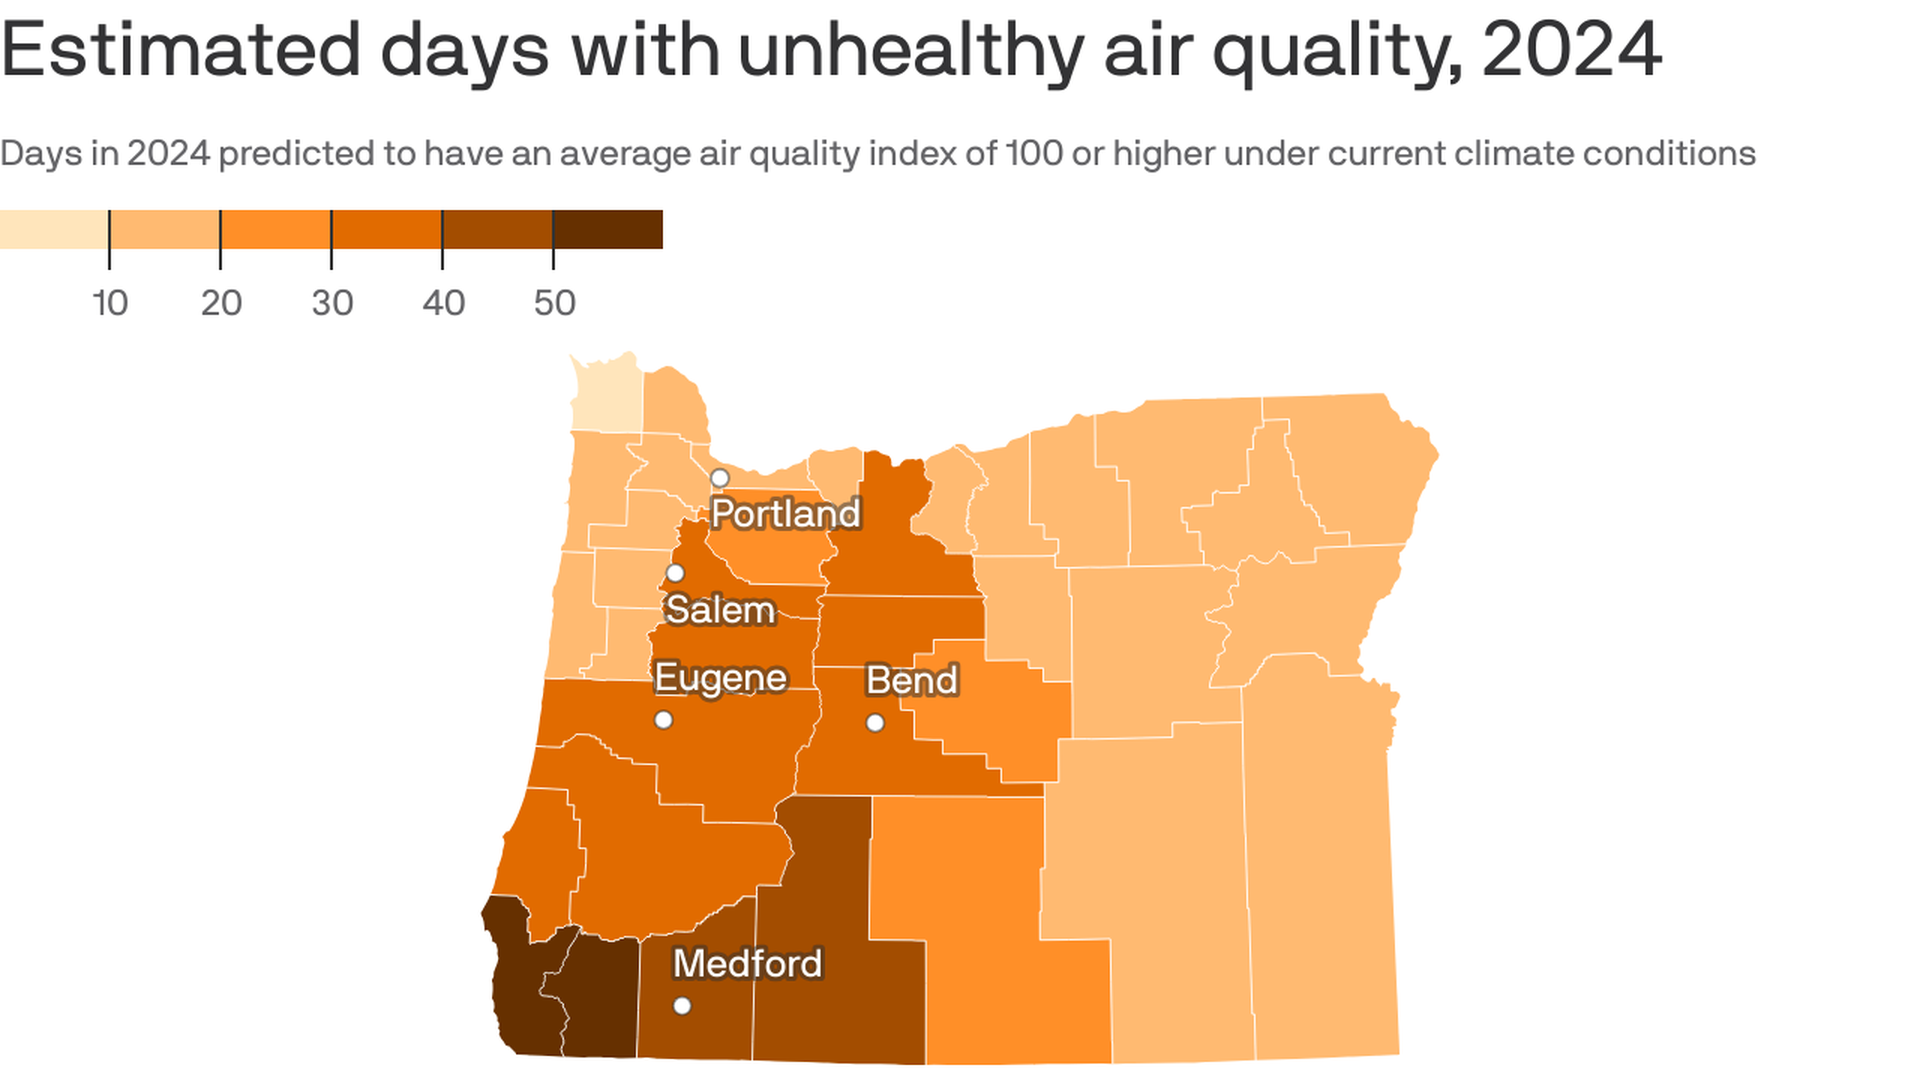 A visual graphic showing air quality data projections across Oregon by 2024